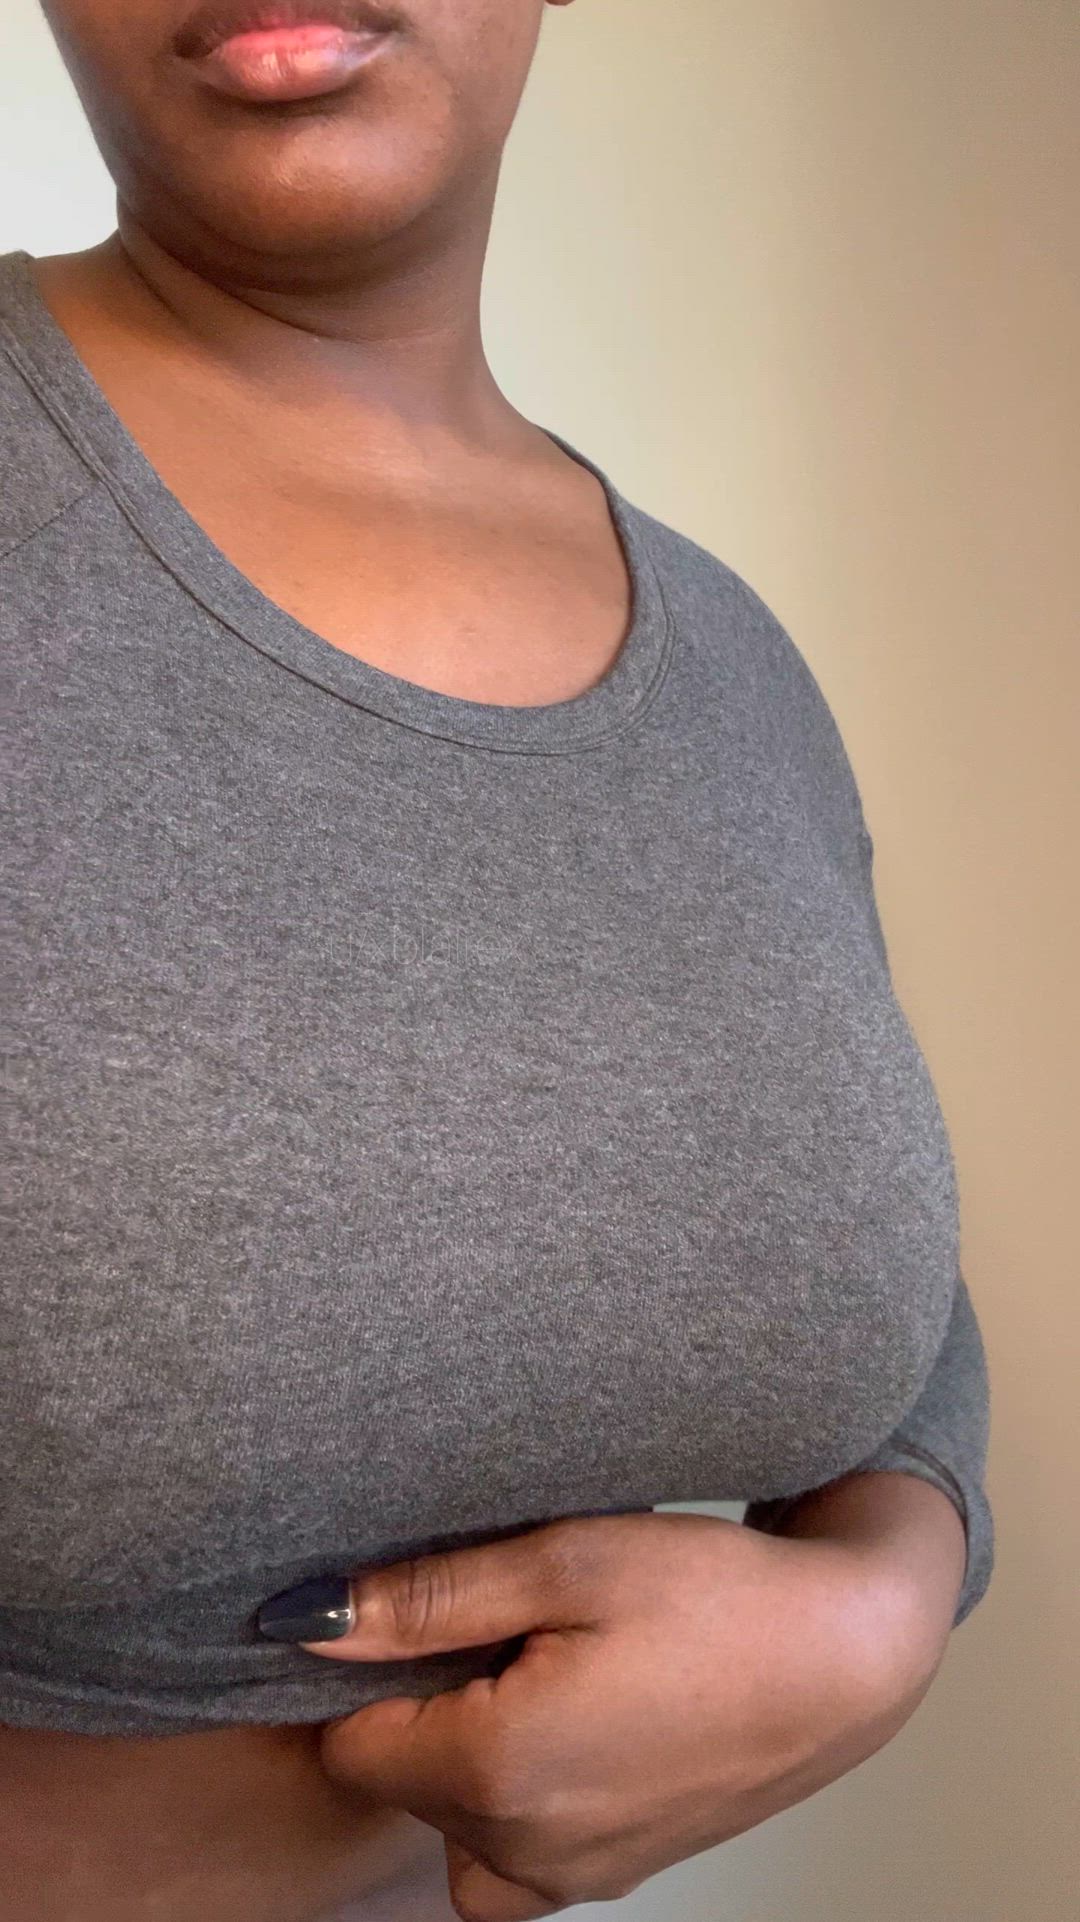 Big Tits porn video with onlyfans model xblairexo <strong>@xblairexo</strong>